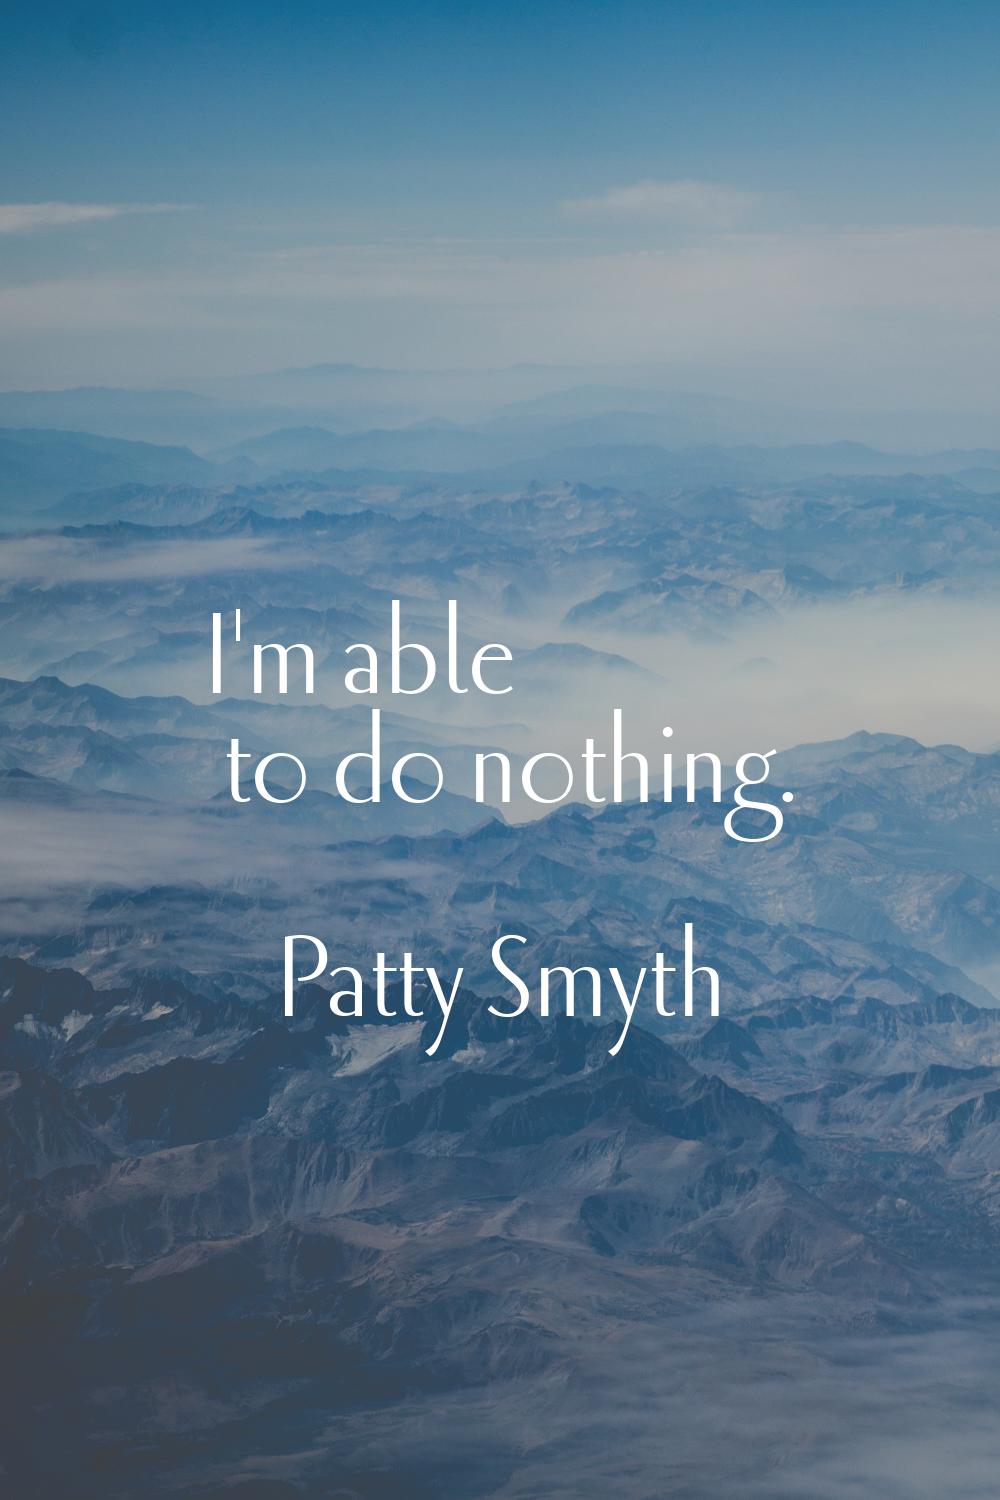 I'm able to do nothing.